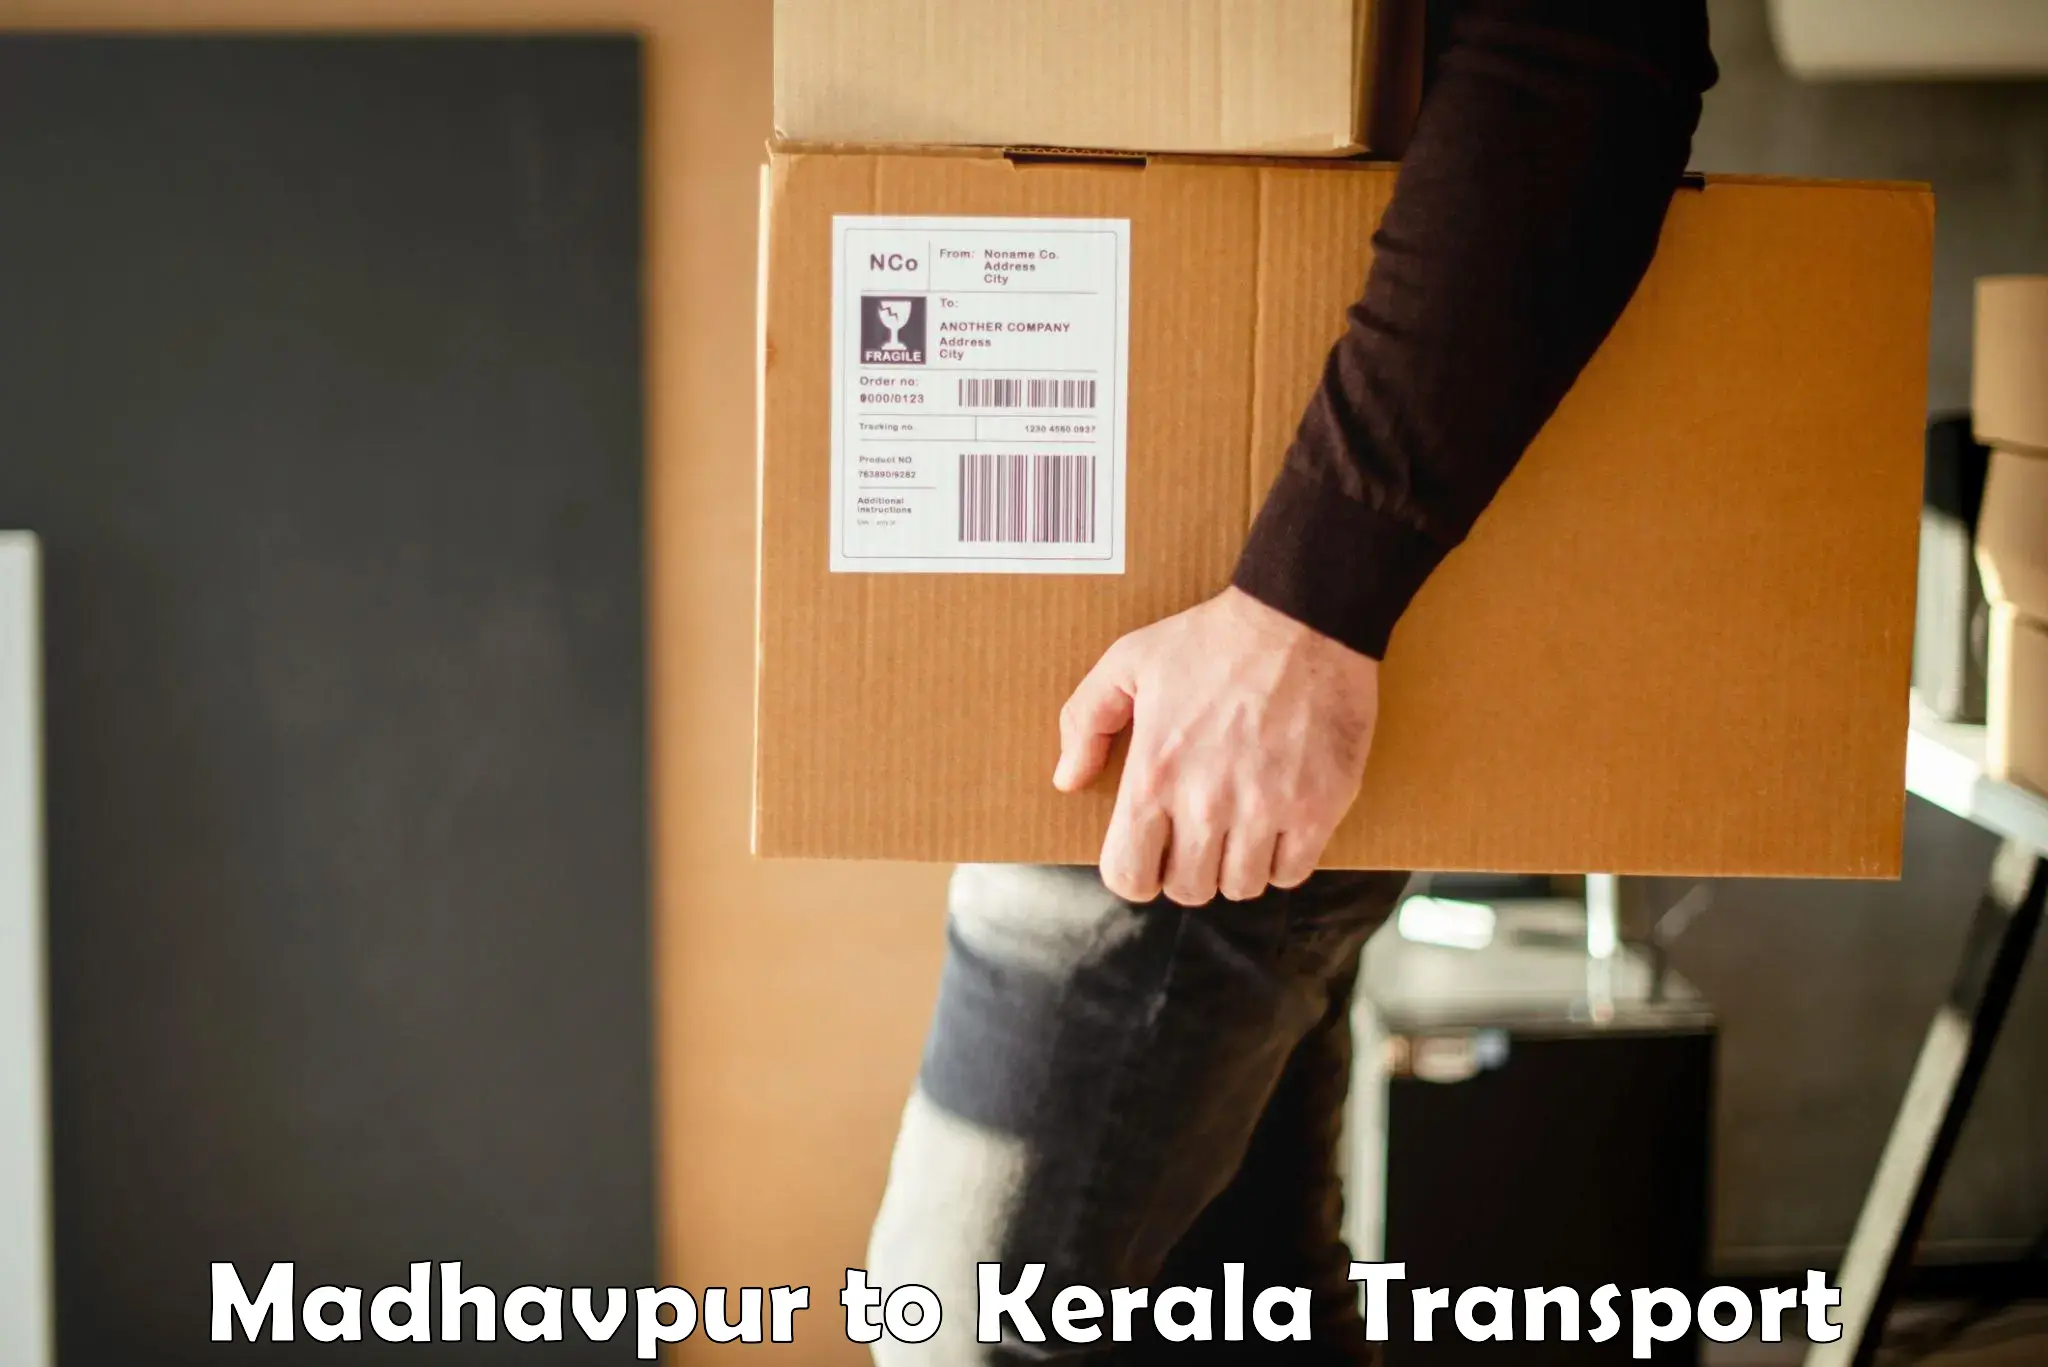 Daily transport service Madhavpur to Kozhikode